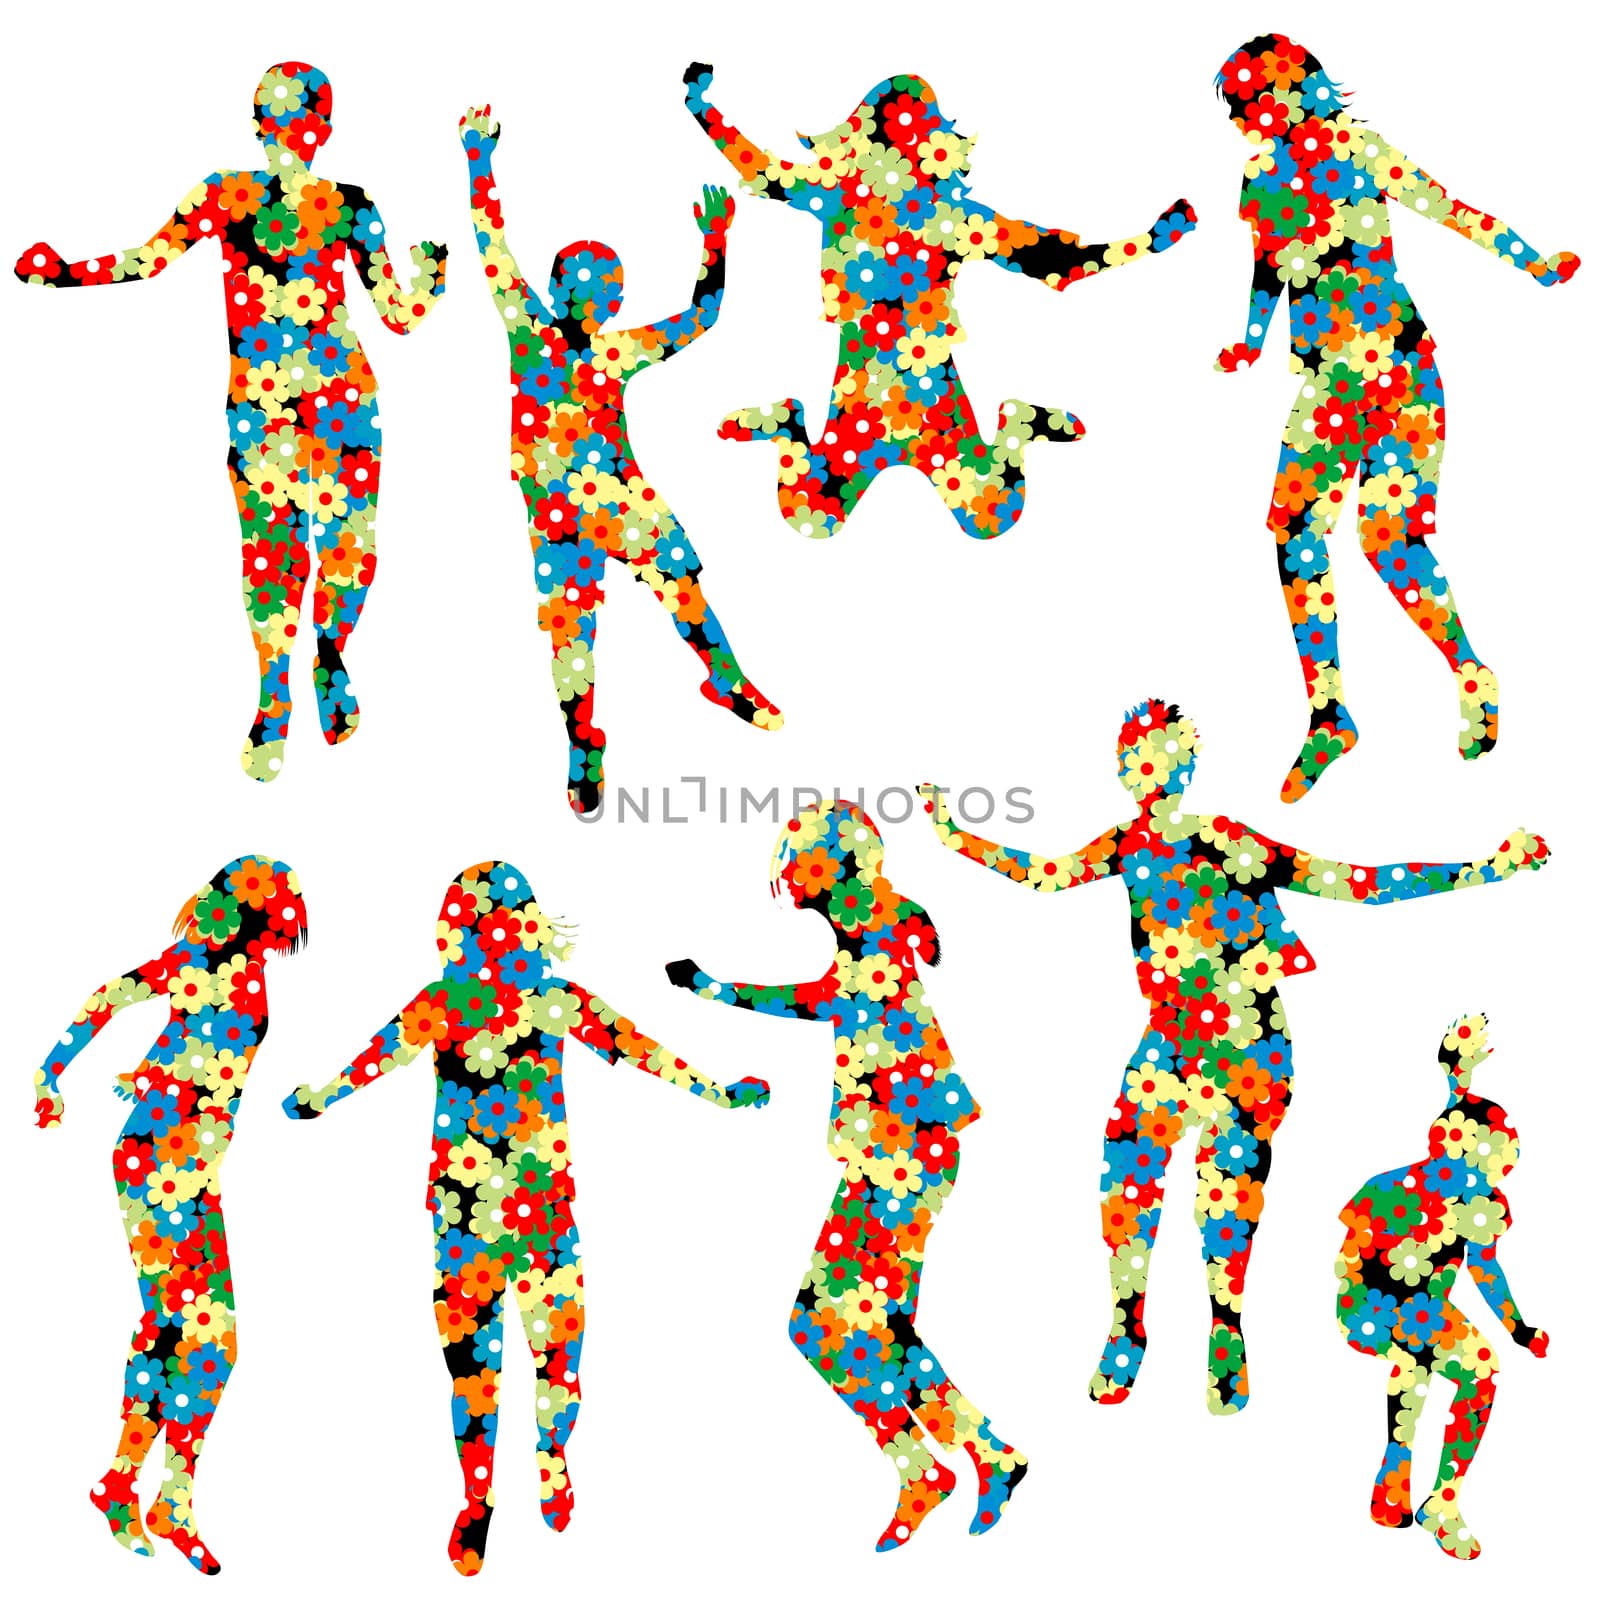 Children silhouettes jumping made of floral pattern